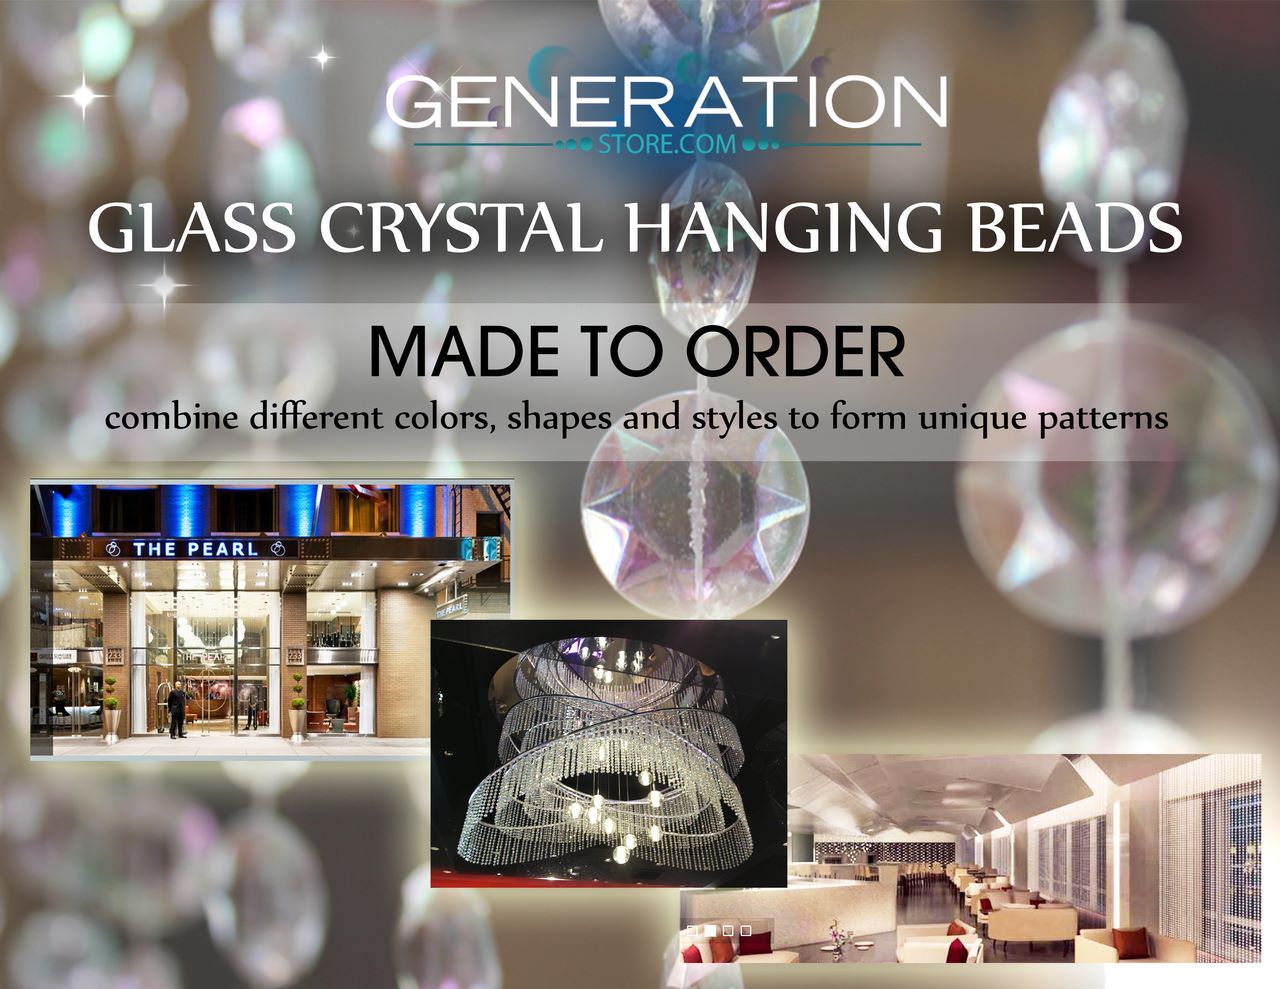 CUSTOM MADE GLASS CRYSTAL HANGING BEADED CURTAINS, CHANDELIERS AND COLUMNS  